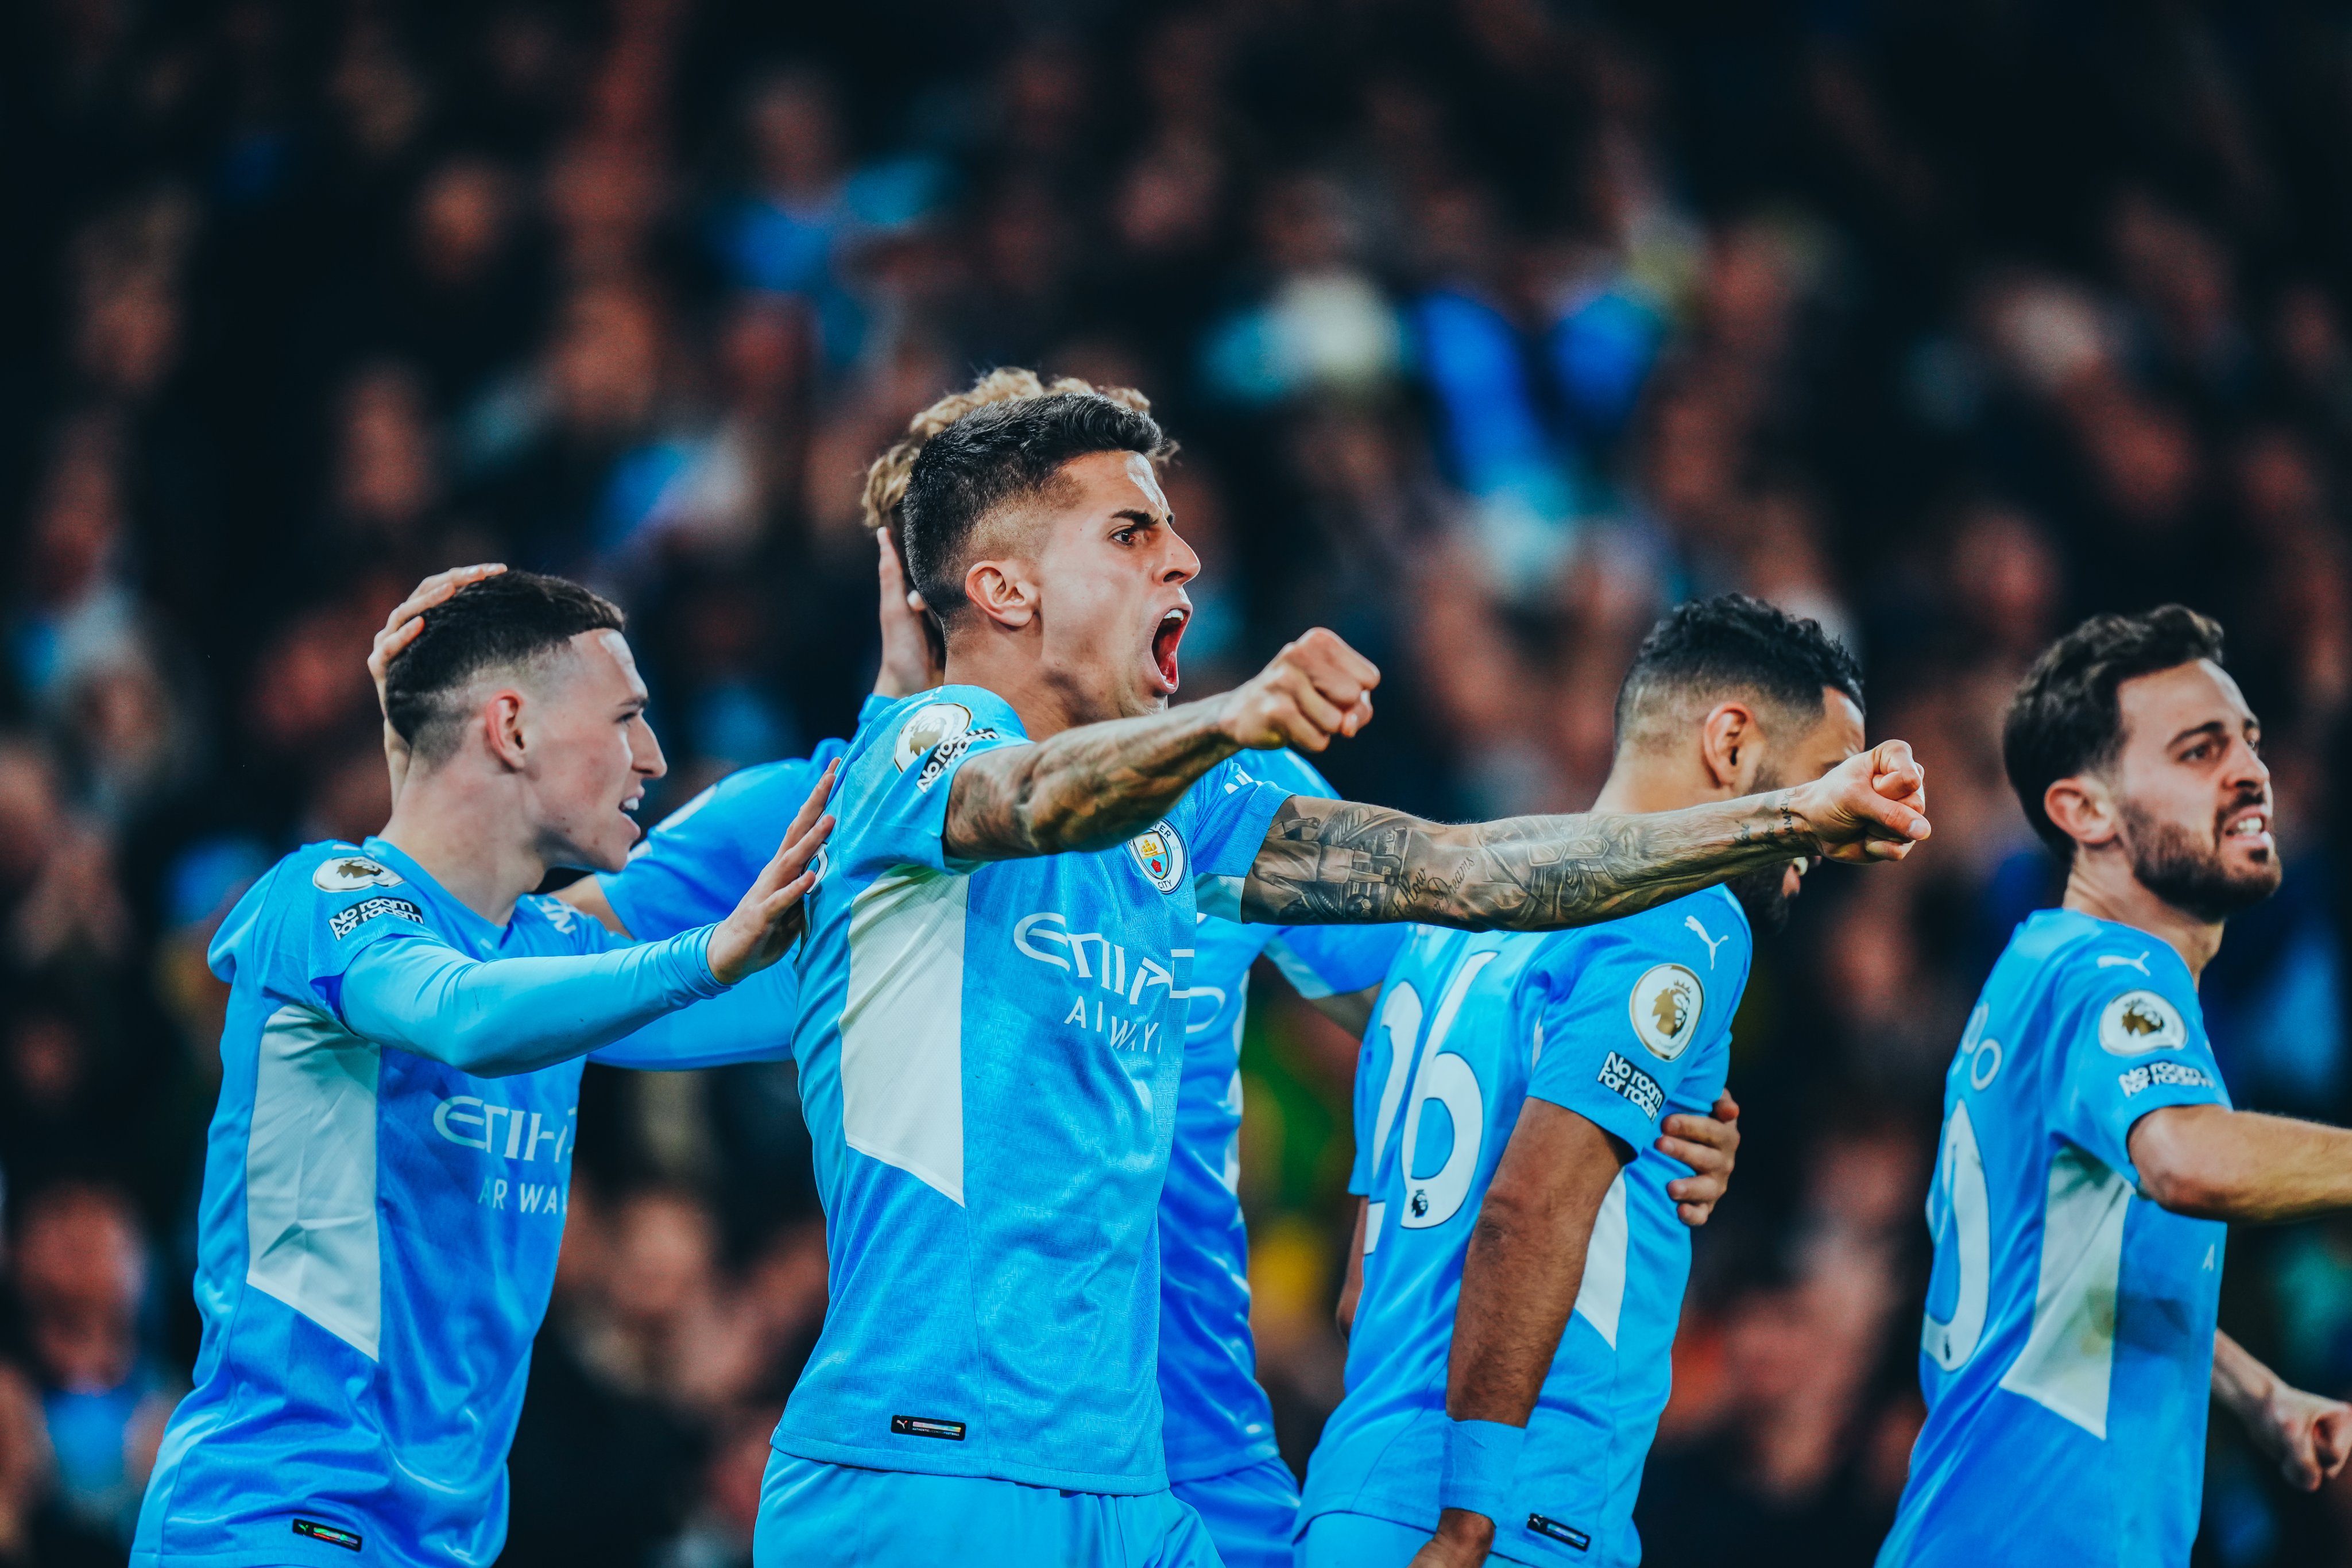 Manchester City 3-0 Brighton: Man City back on top of the 'Premier League table' after a commanding second-half performance, Check Man City beat Brighton HIGHLIGHTS